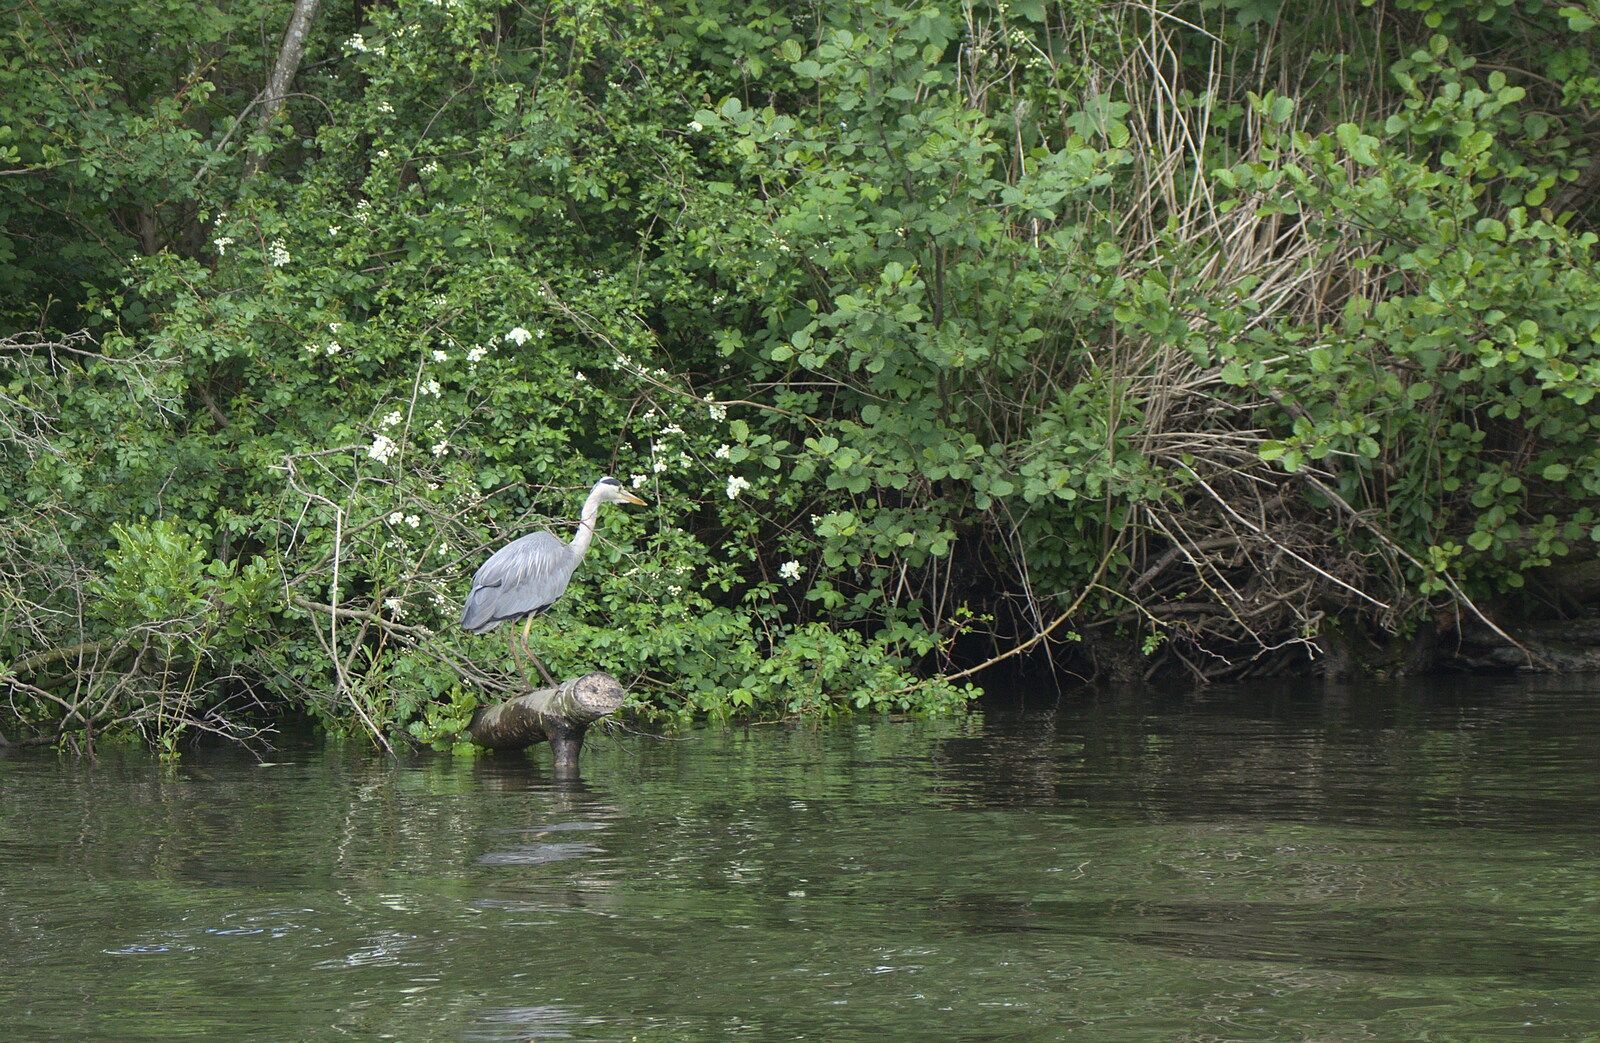 A heron stalks its prey from A Trip on the Norfolk Broads, Wroxham, Norfolk - 25th May 2013